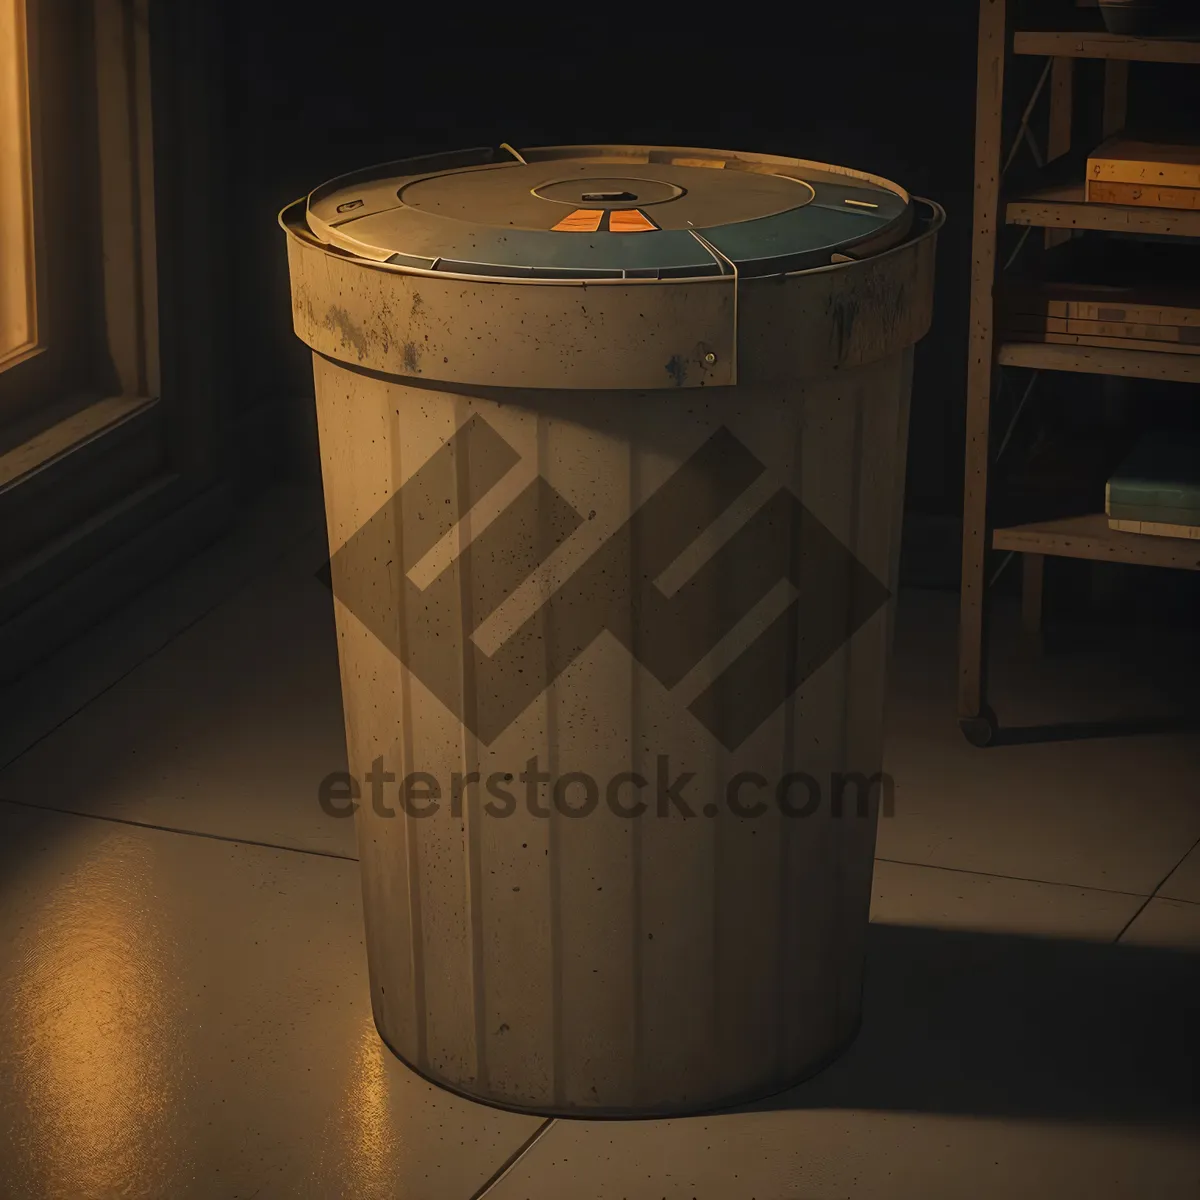 Picture of Trash Bin: Containing Garbage and Drink